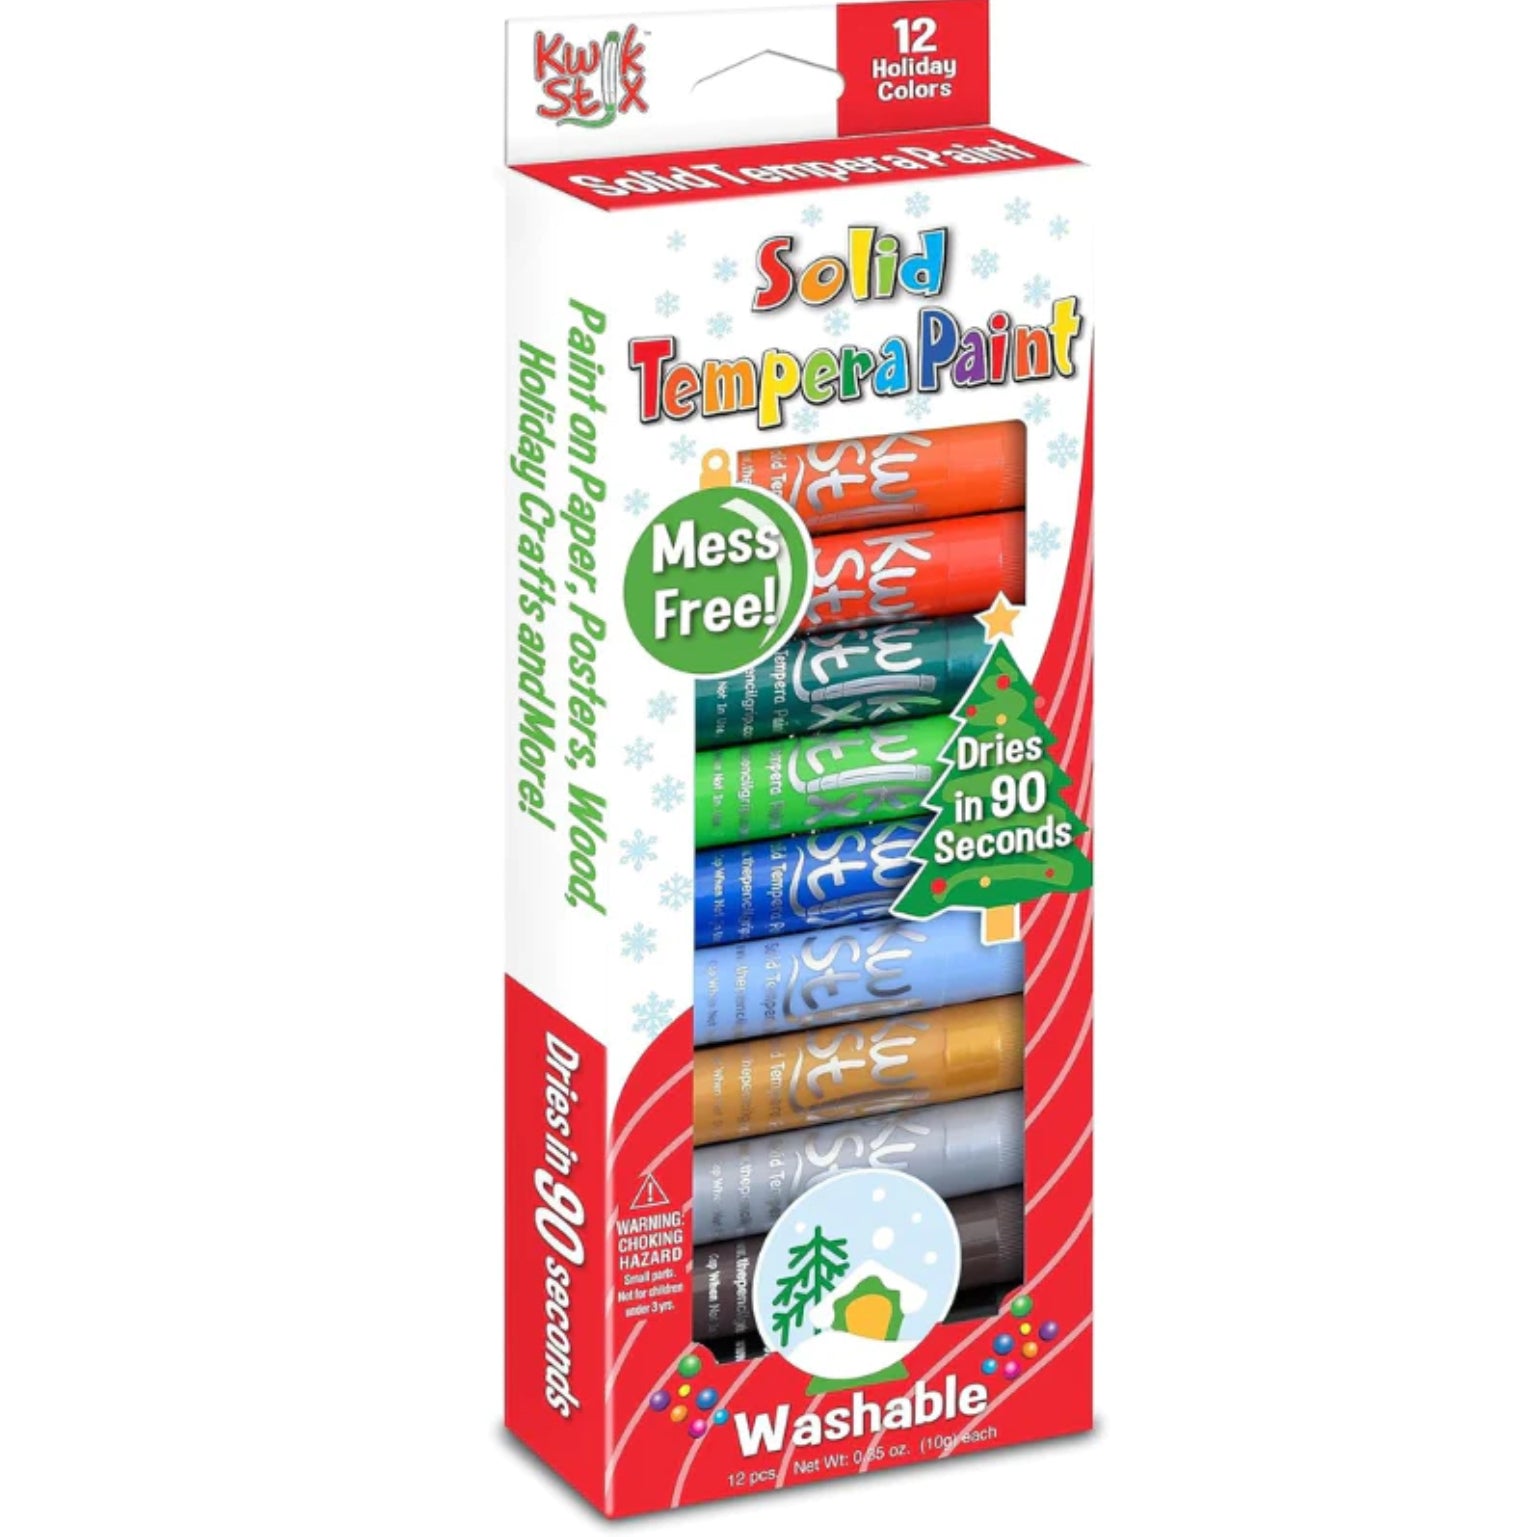 Kwik Stix 12 Holiday Limited Edition by The Pencil Grip #TPG-697